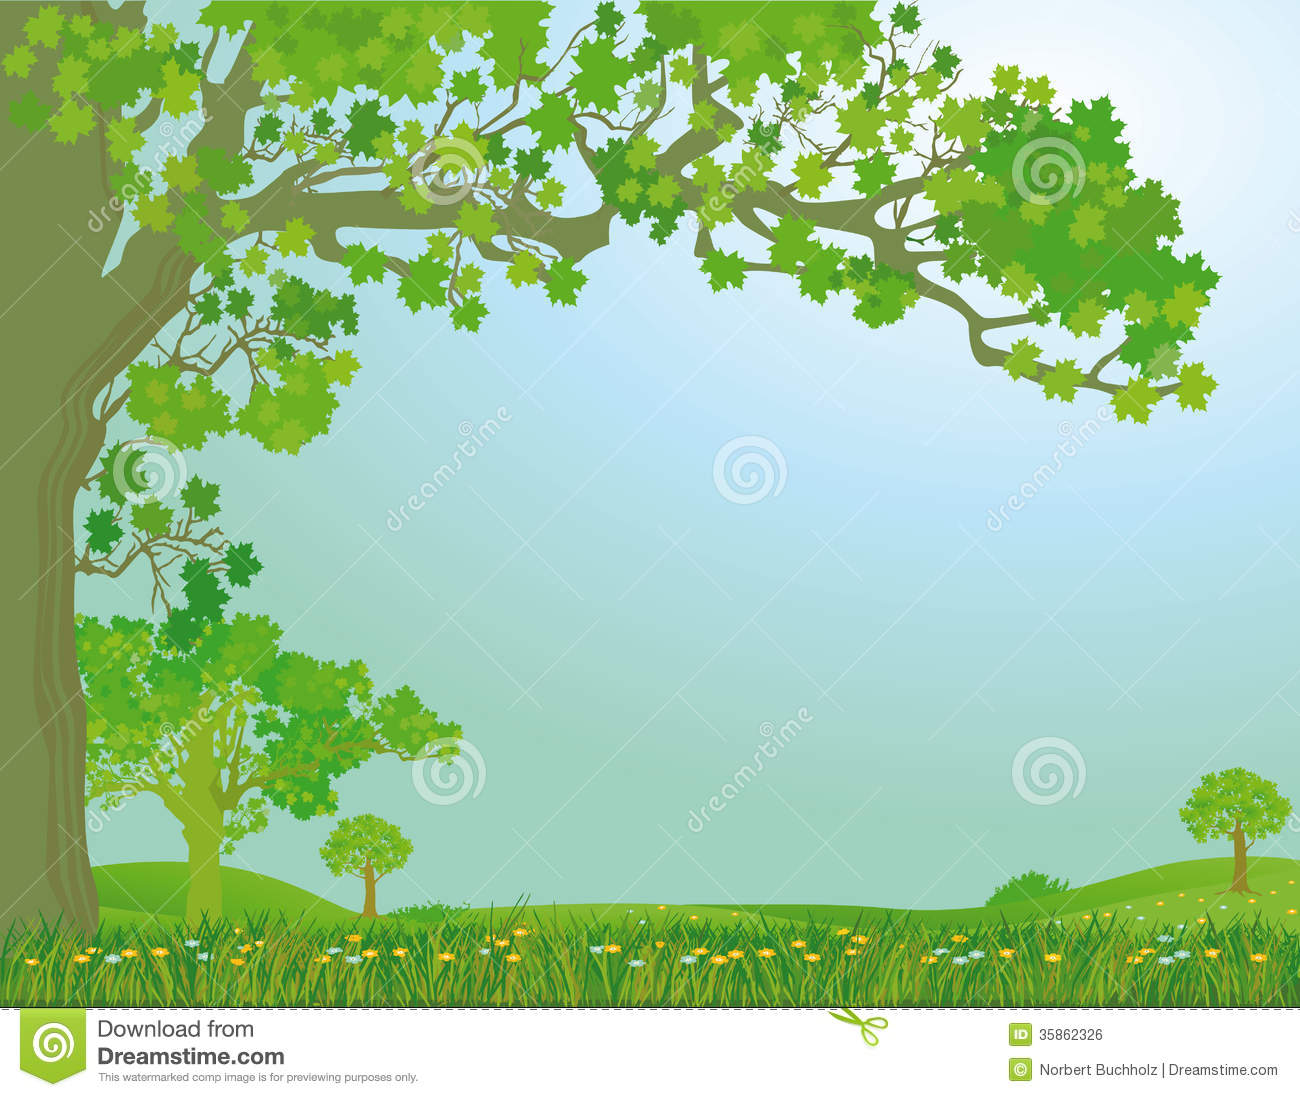 flower meadow clipart - photo #22